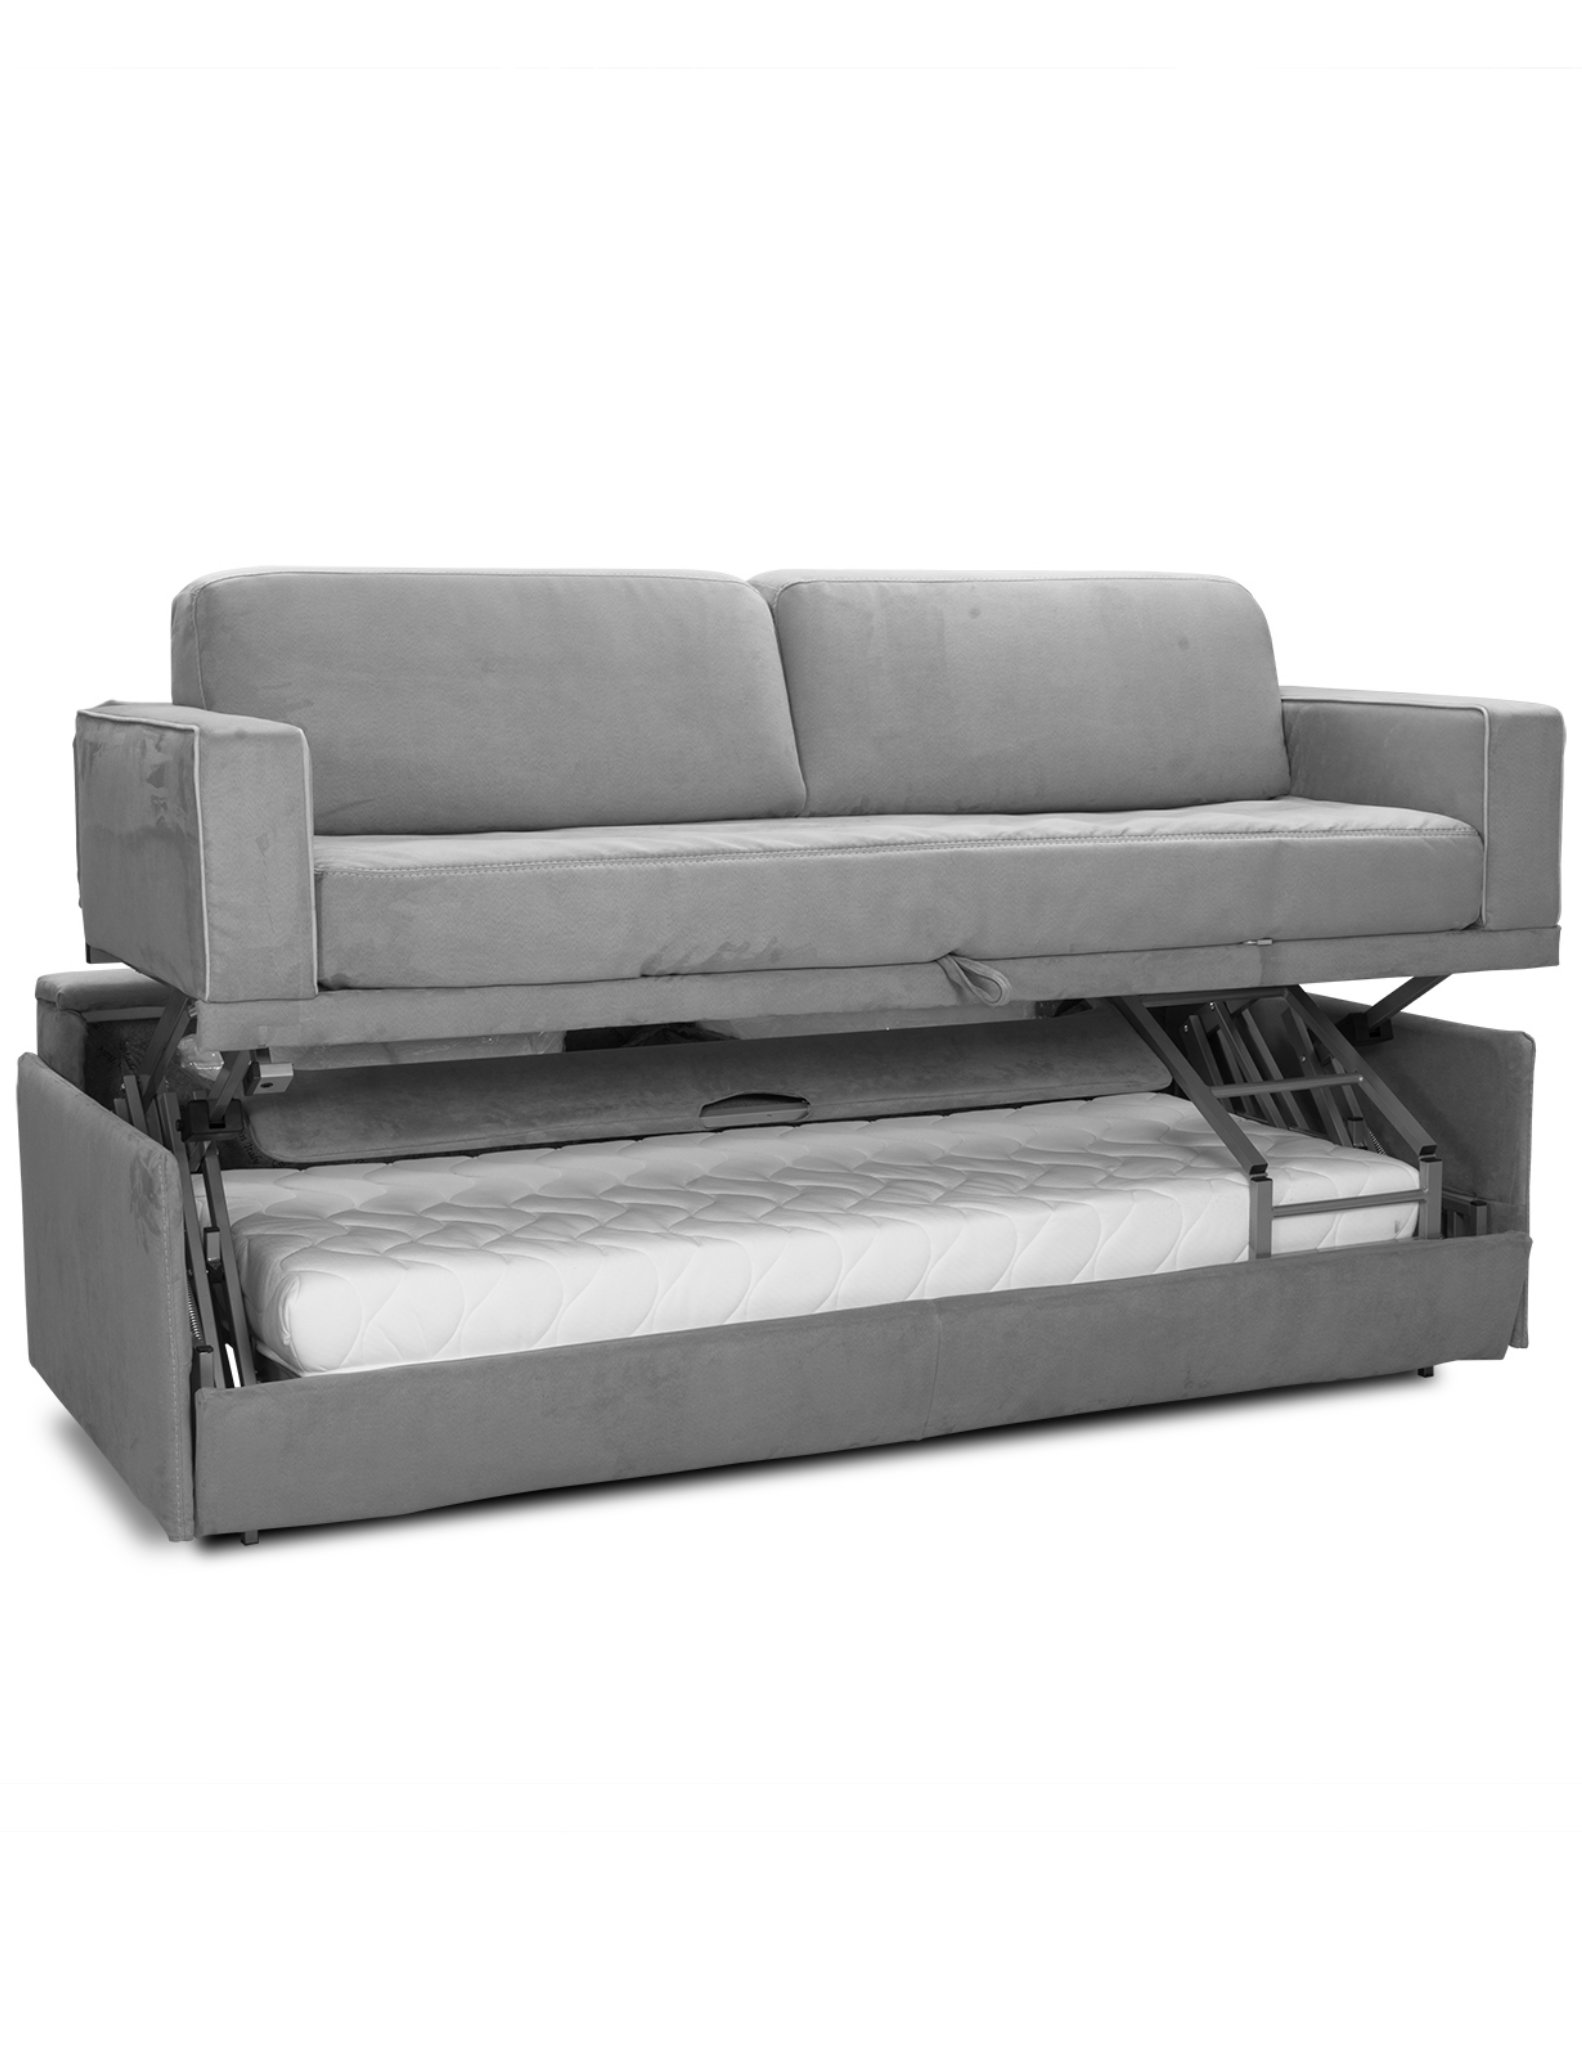 Bunk Bed Couch Transformer, Transformer Couch Bunk Bed